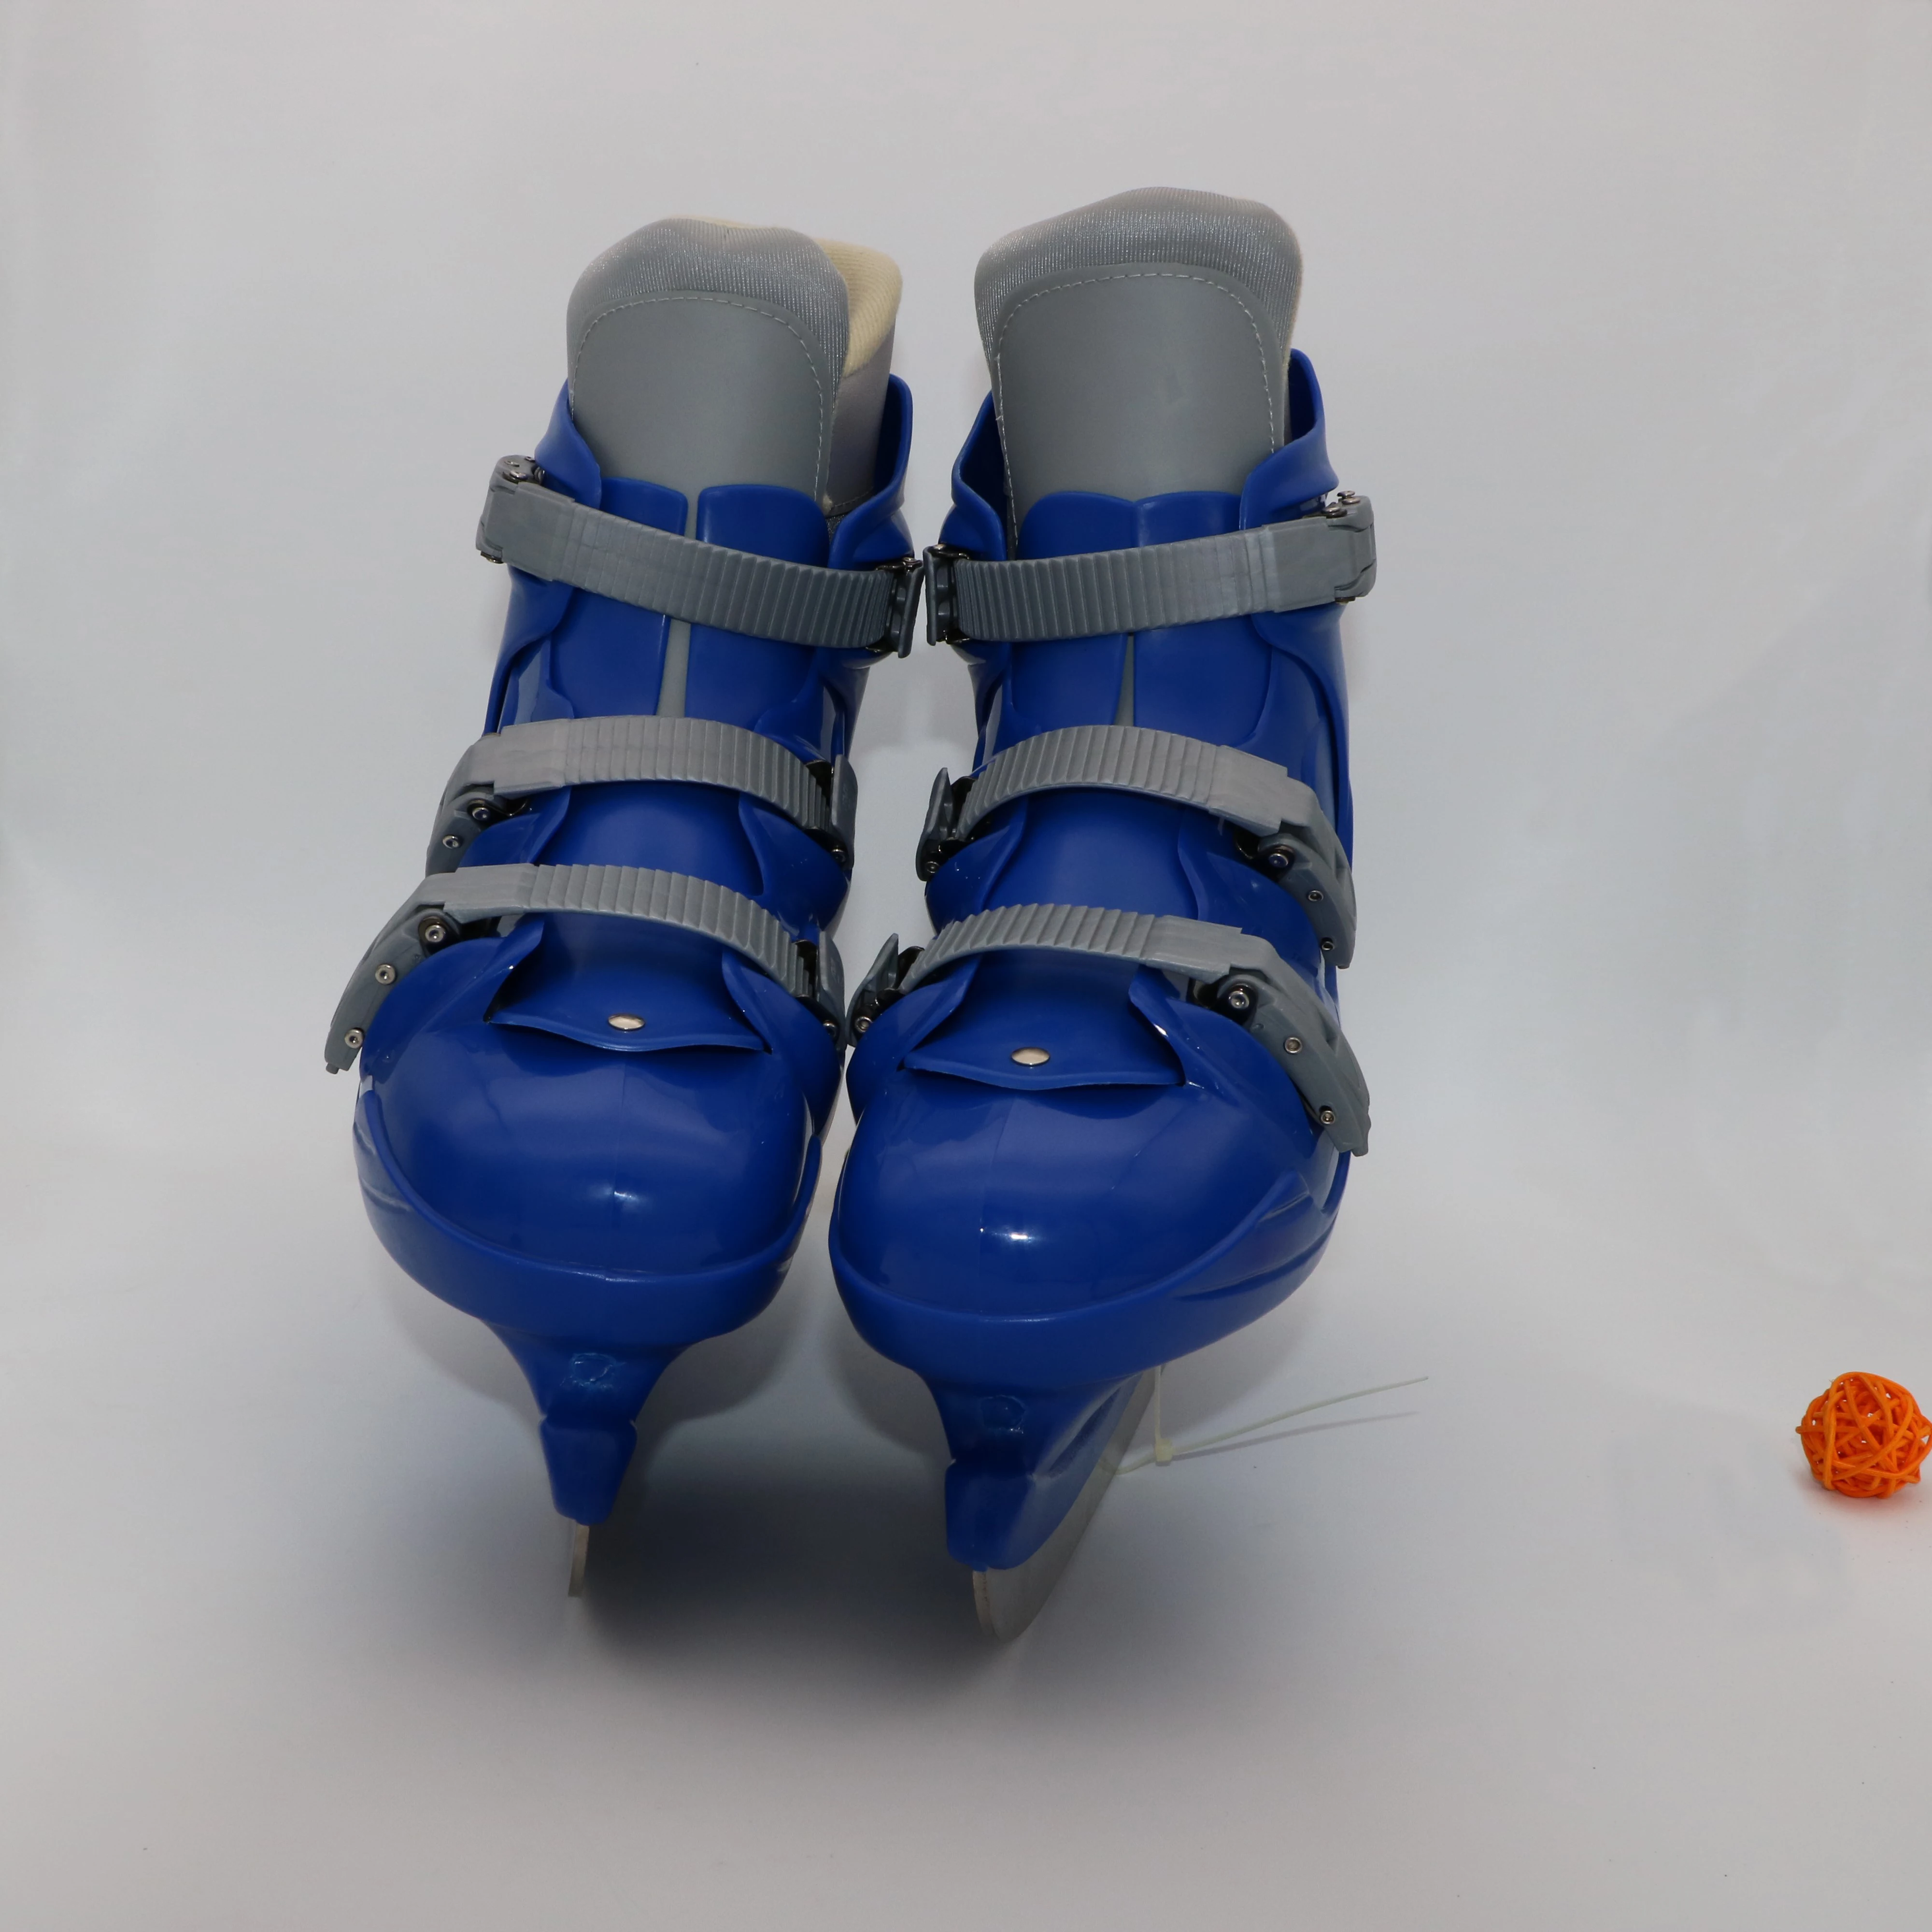 
Ice skate rink rental shoes Blue color large quantity in stock cheap price wholesale 